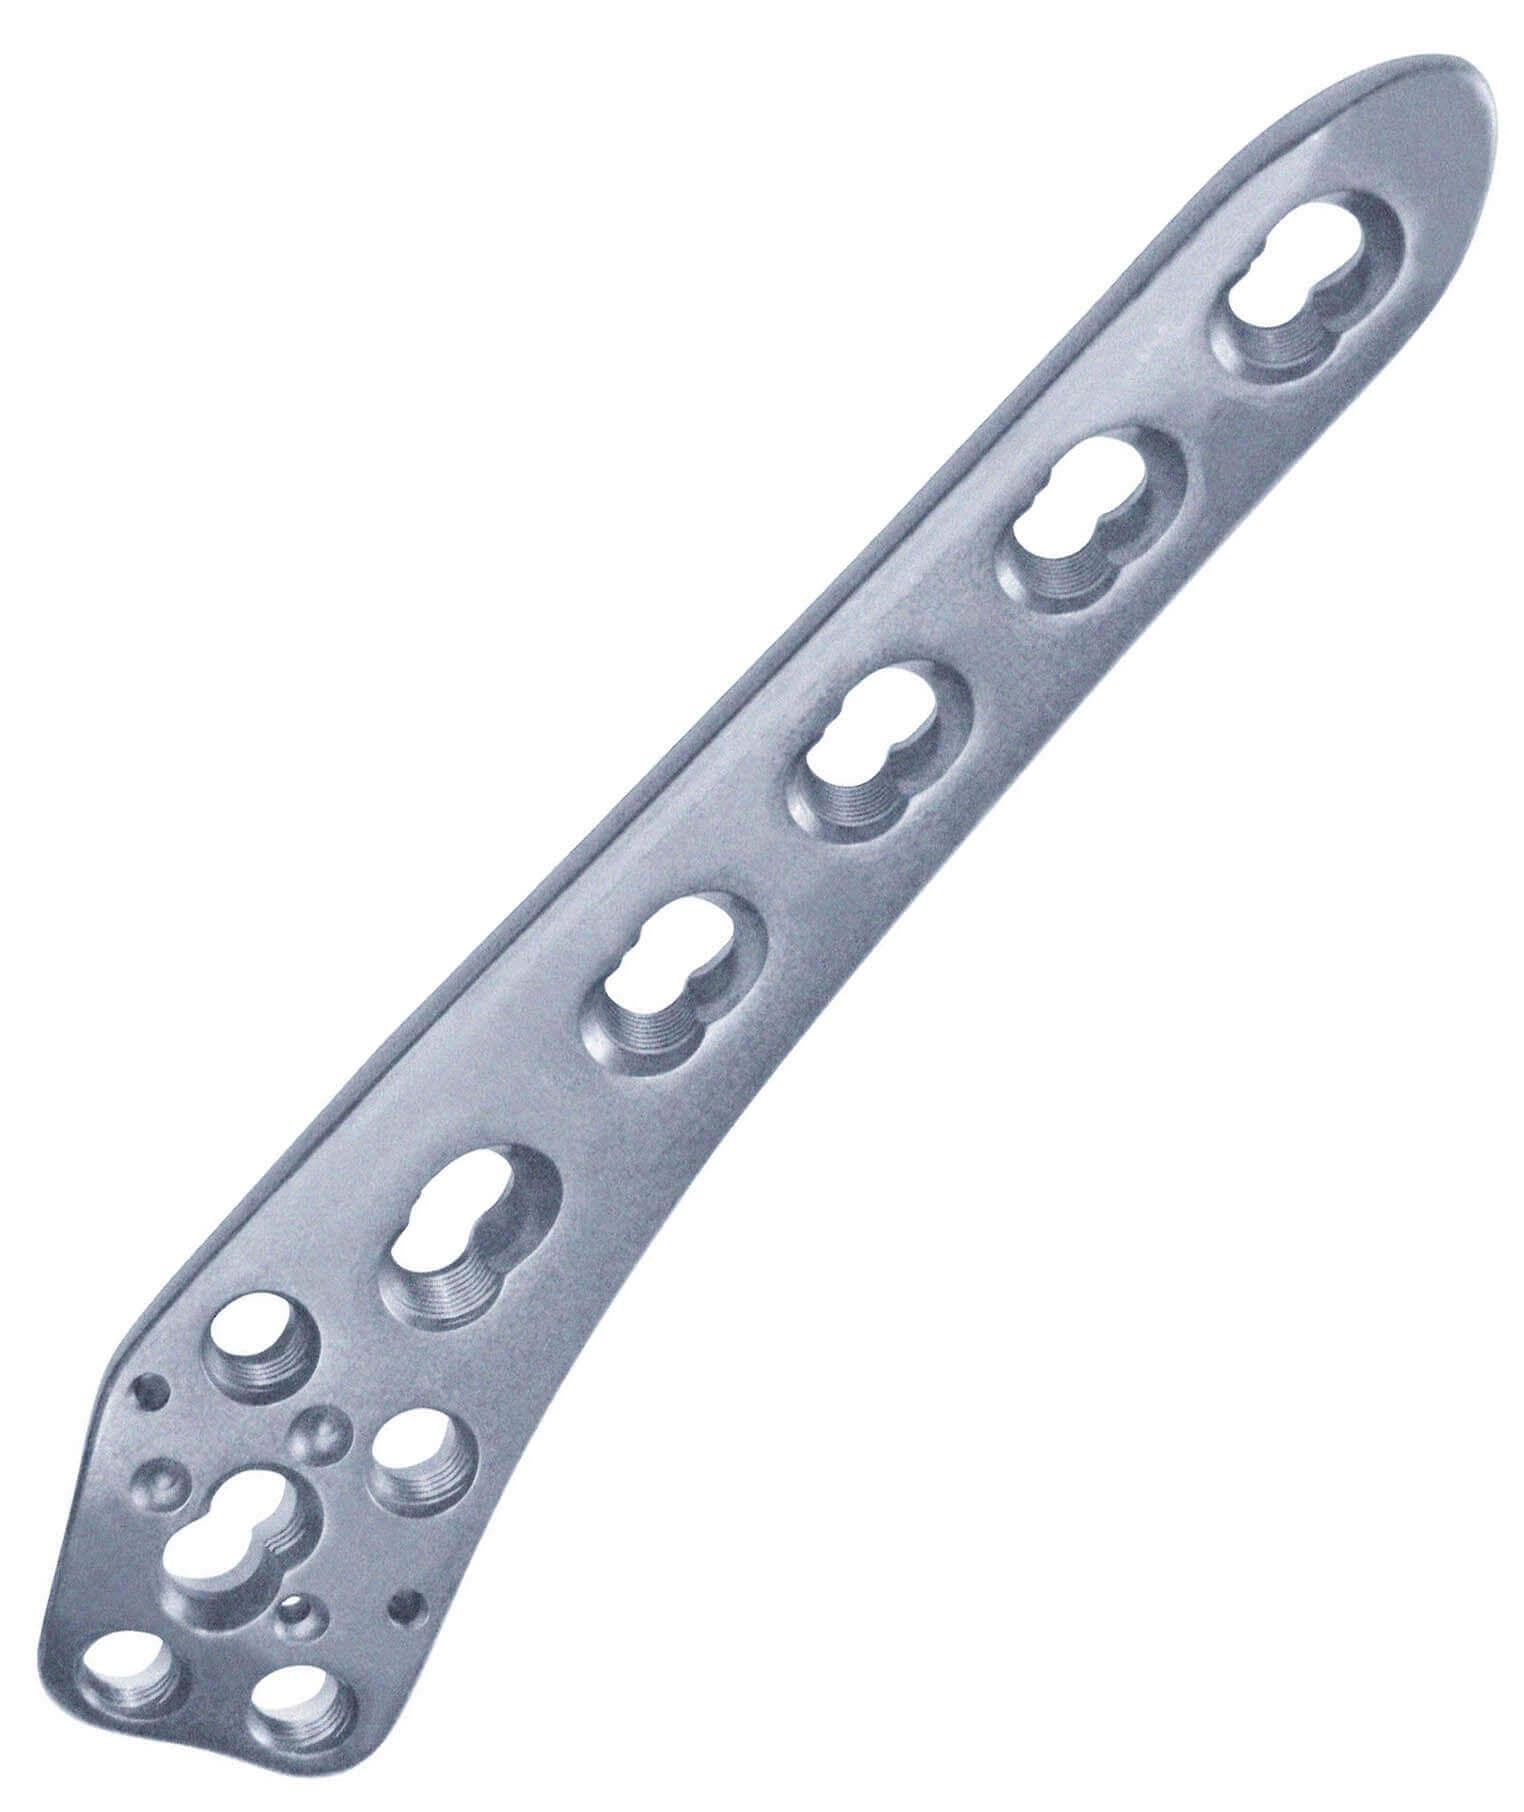 Distal lateral femoral osteotomy locking plate